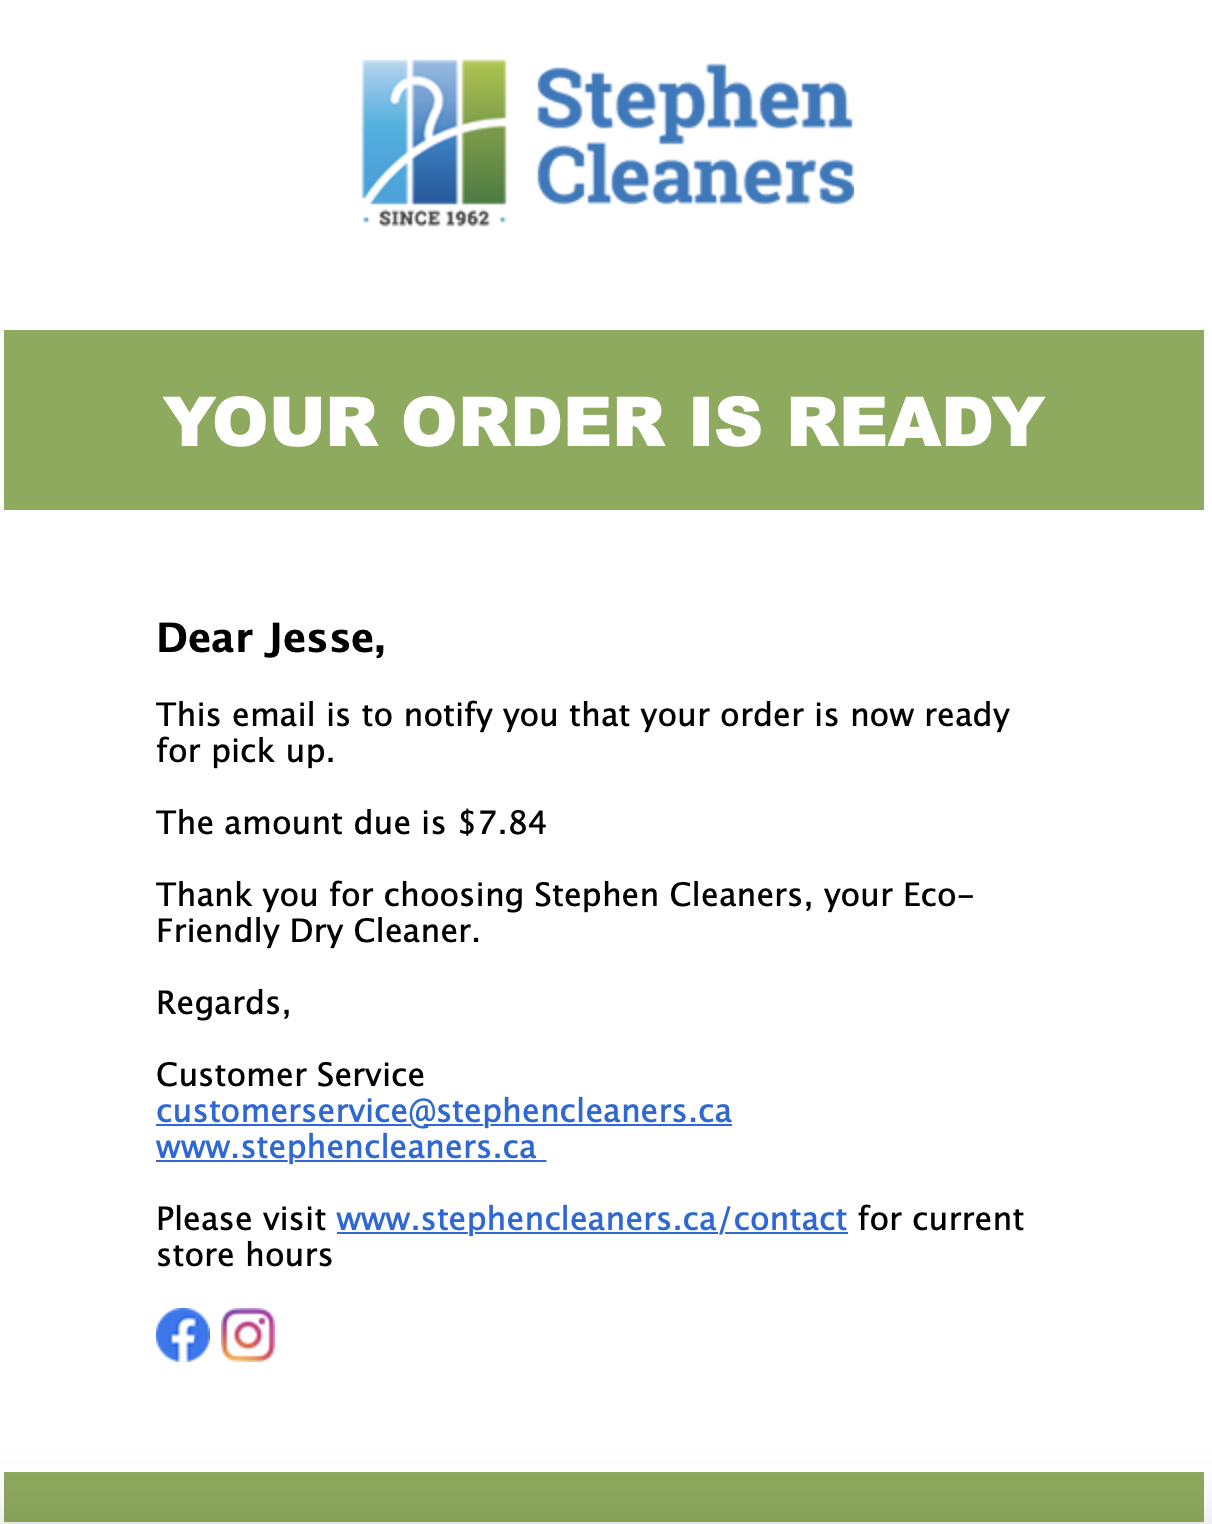 http://stephencleaners.ca/wp-content/uploads/2021/04/Screen-Shot-2021-04-28-at-12.01.18-PM.png